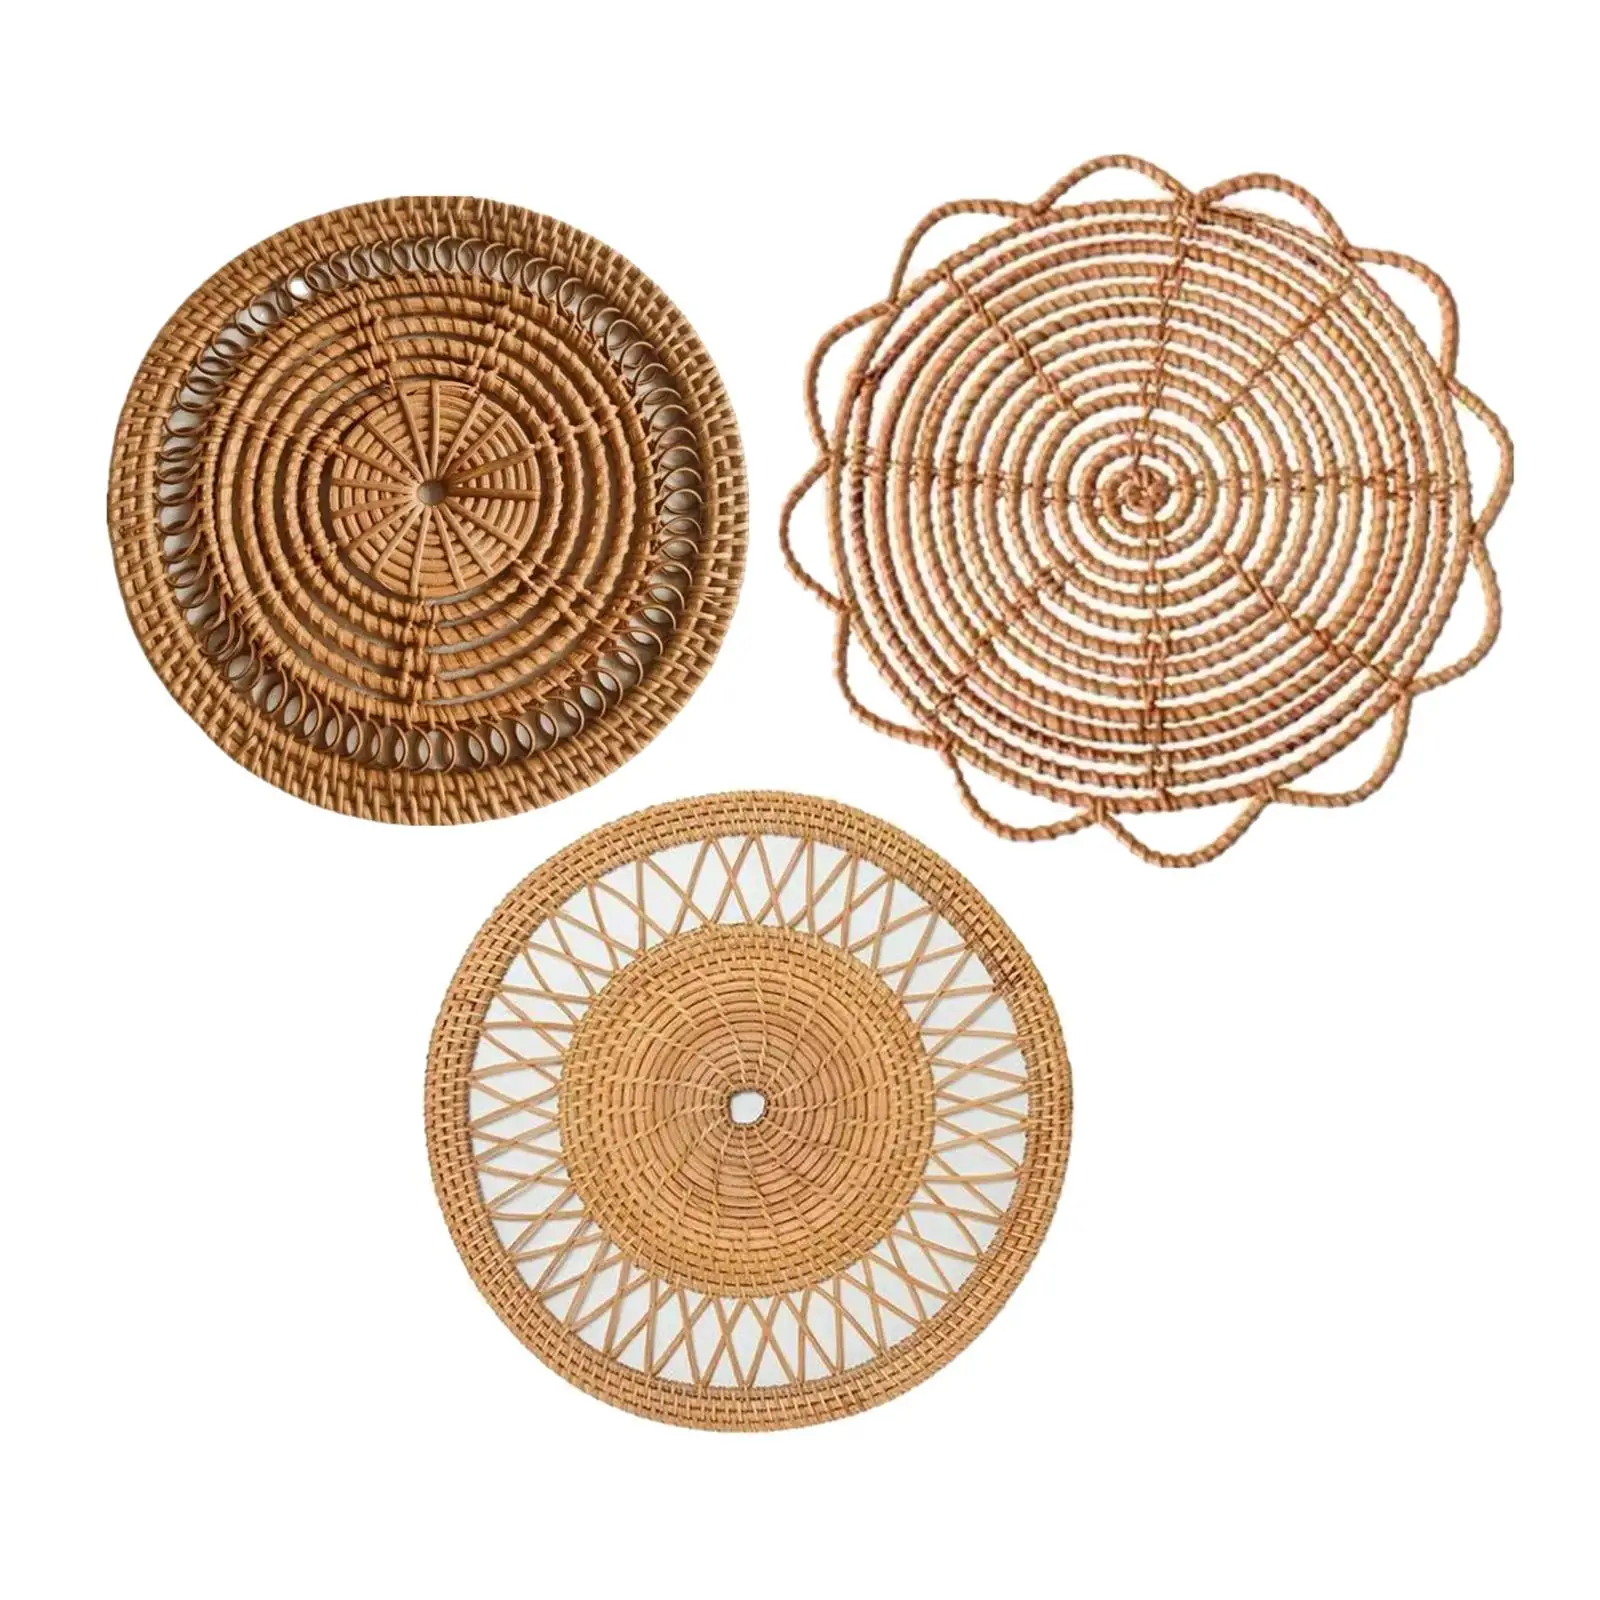 Rattan Wall Basket Decor Unique Wall Hanging Hand Woven for Home and Office